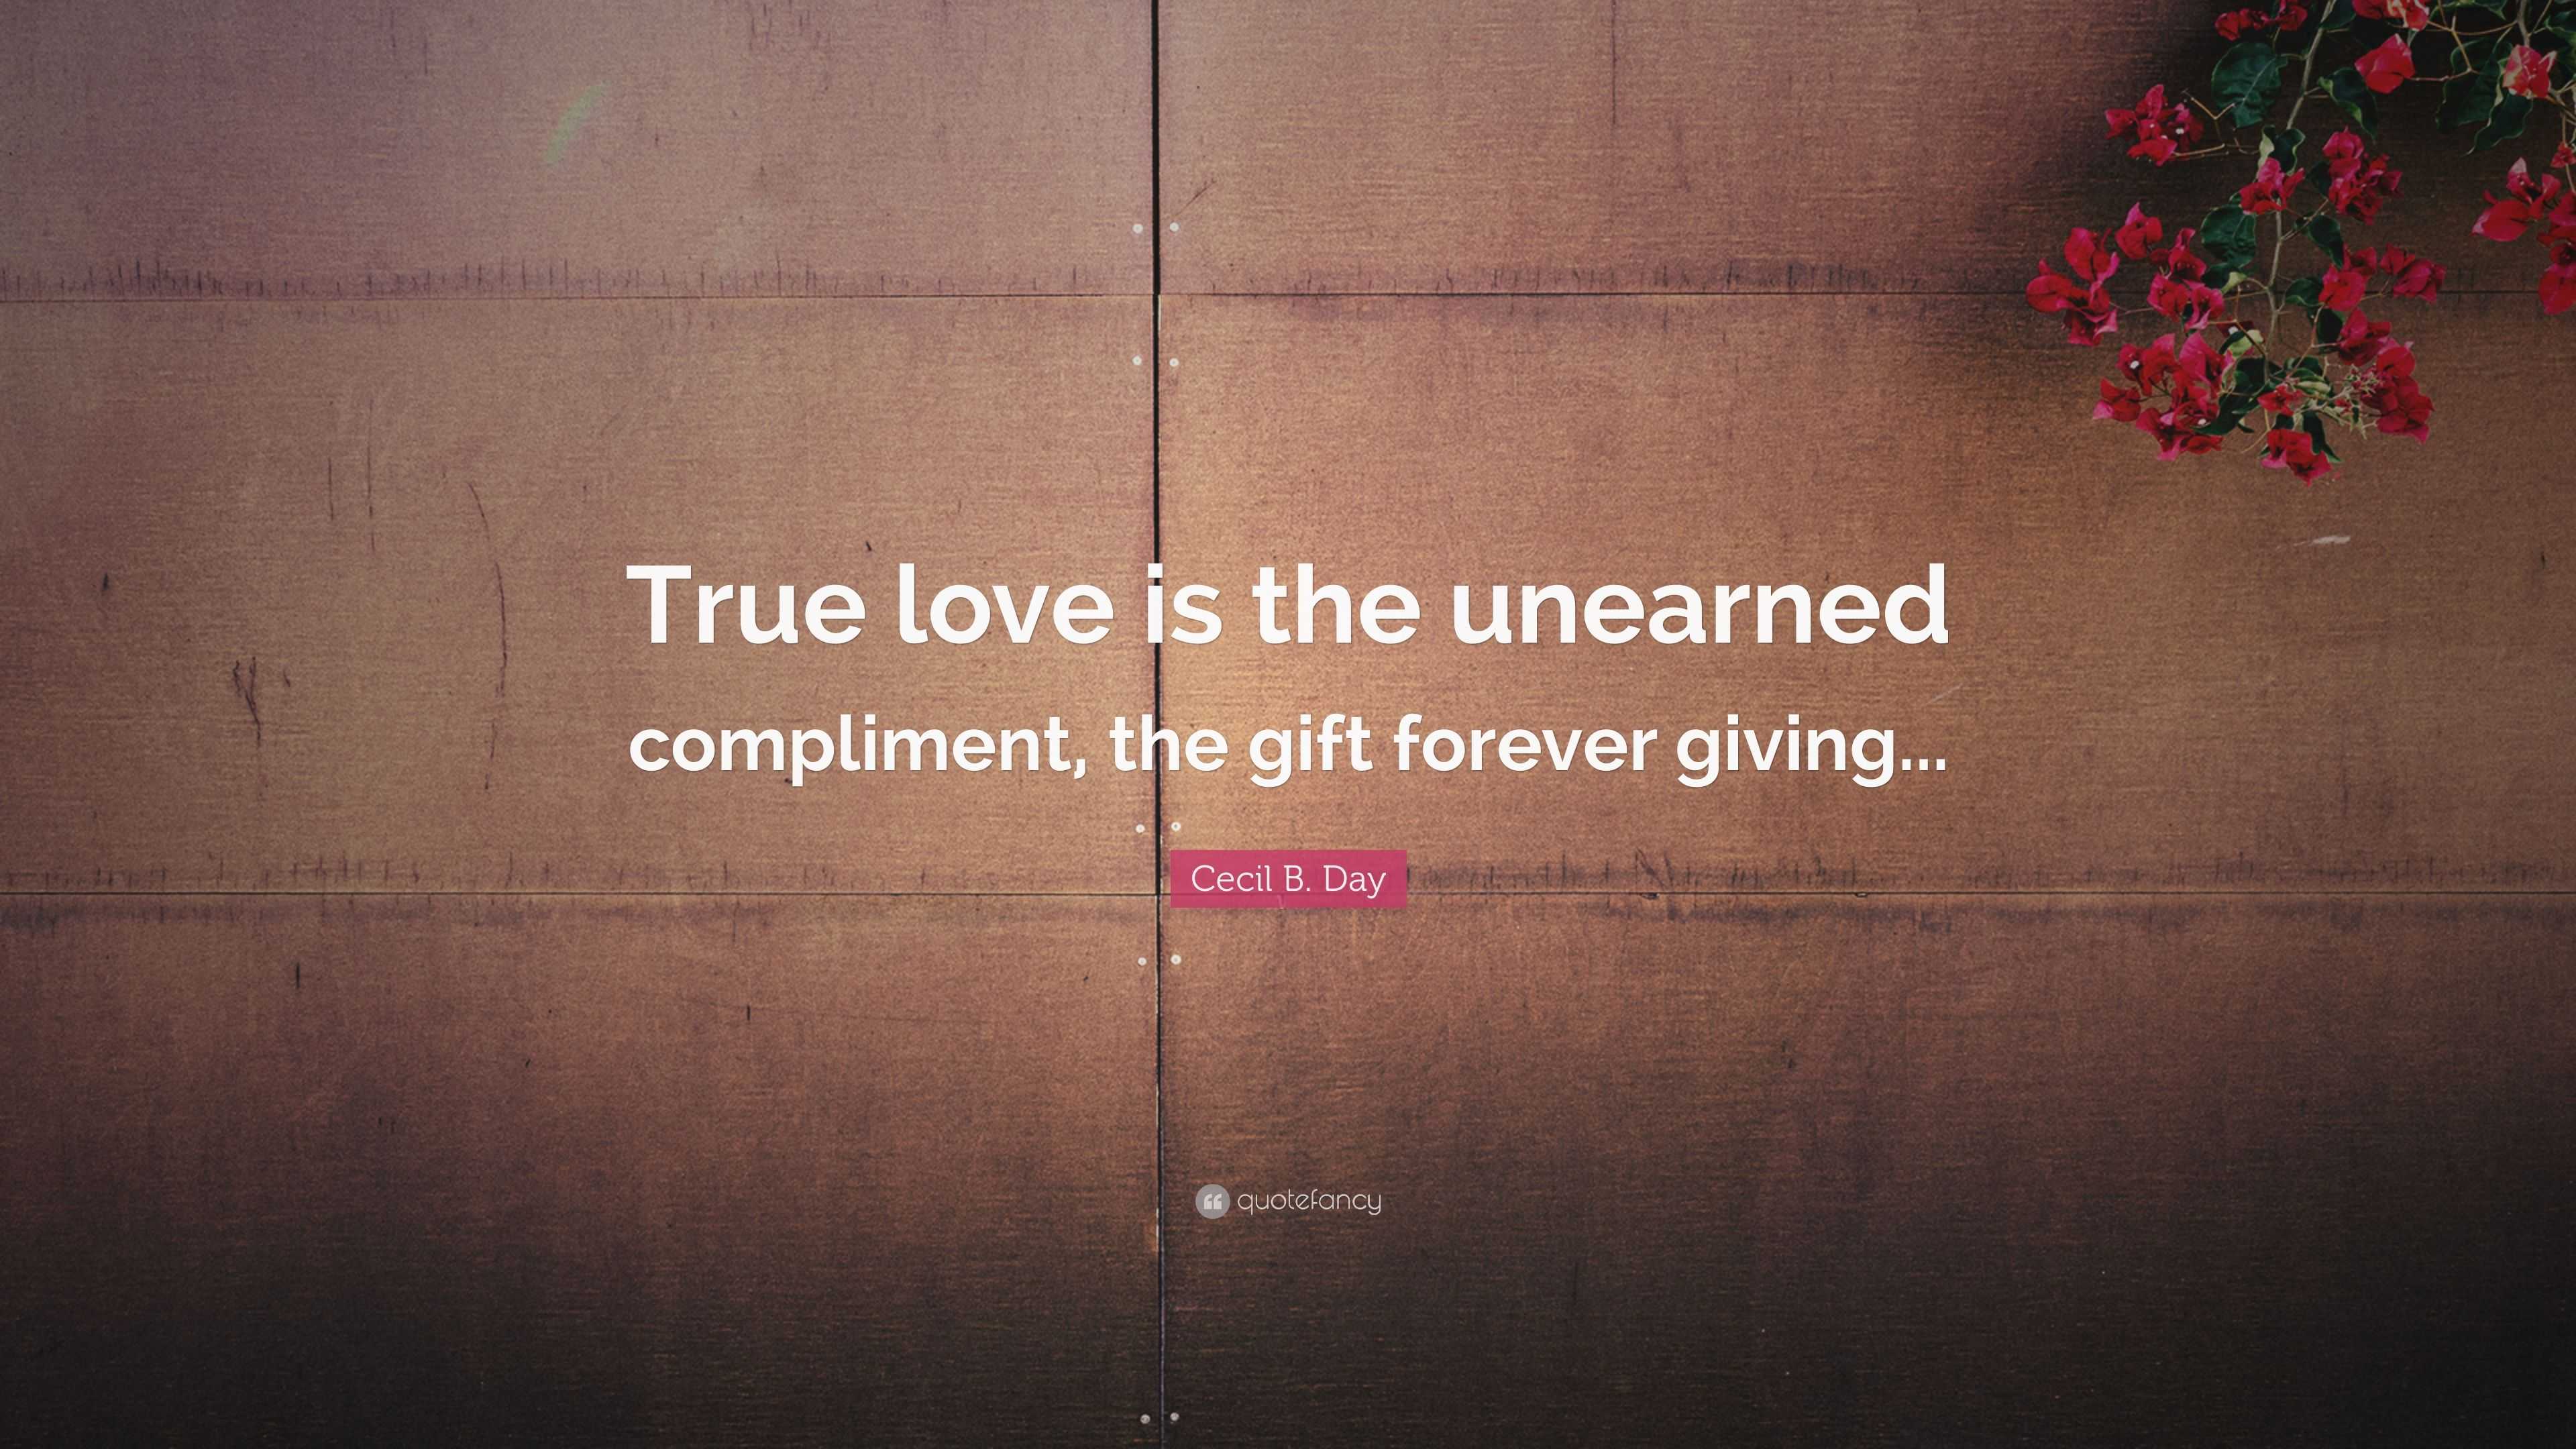 Cecil B Day Quote “True love is the unearned pliment the t